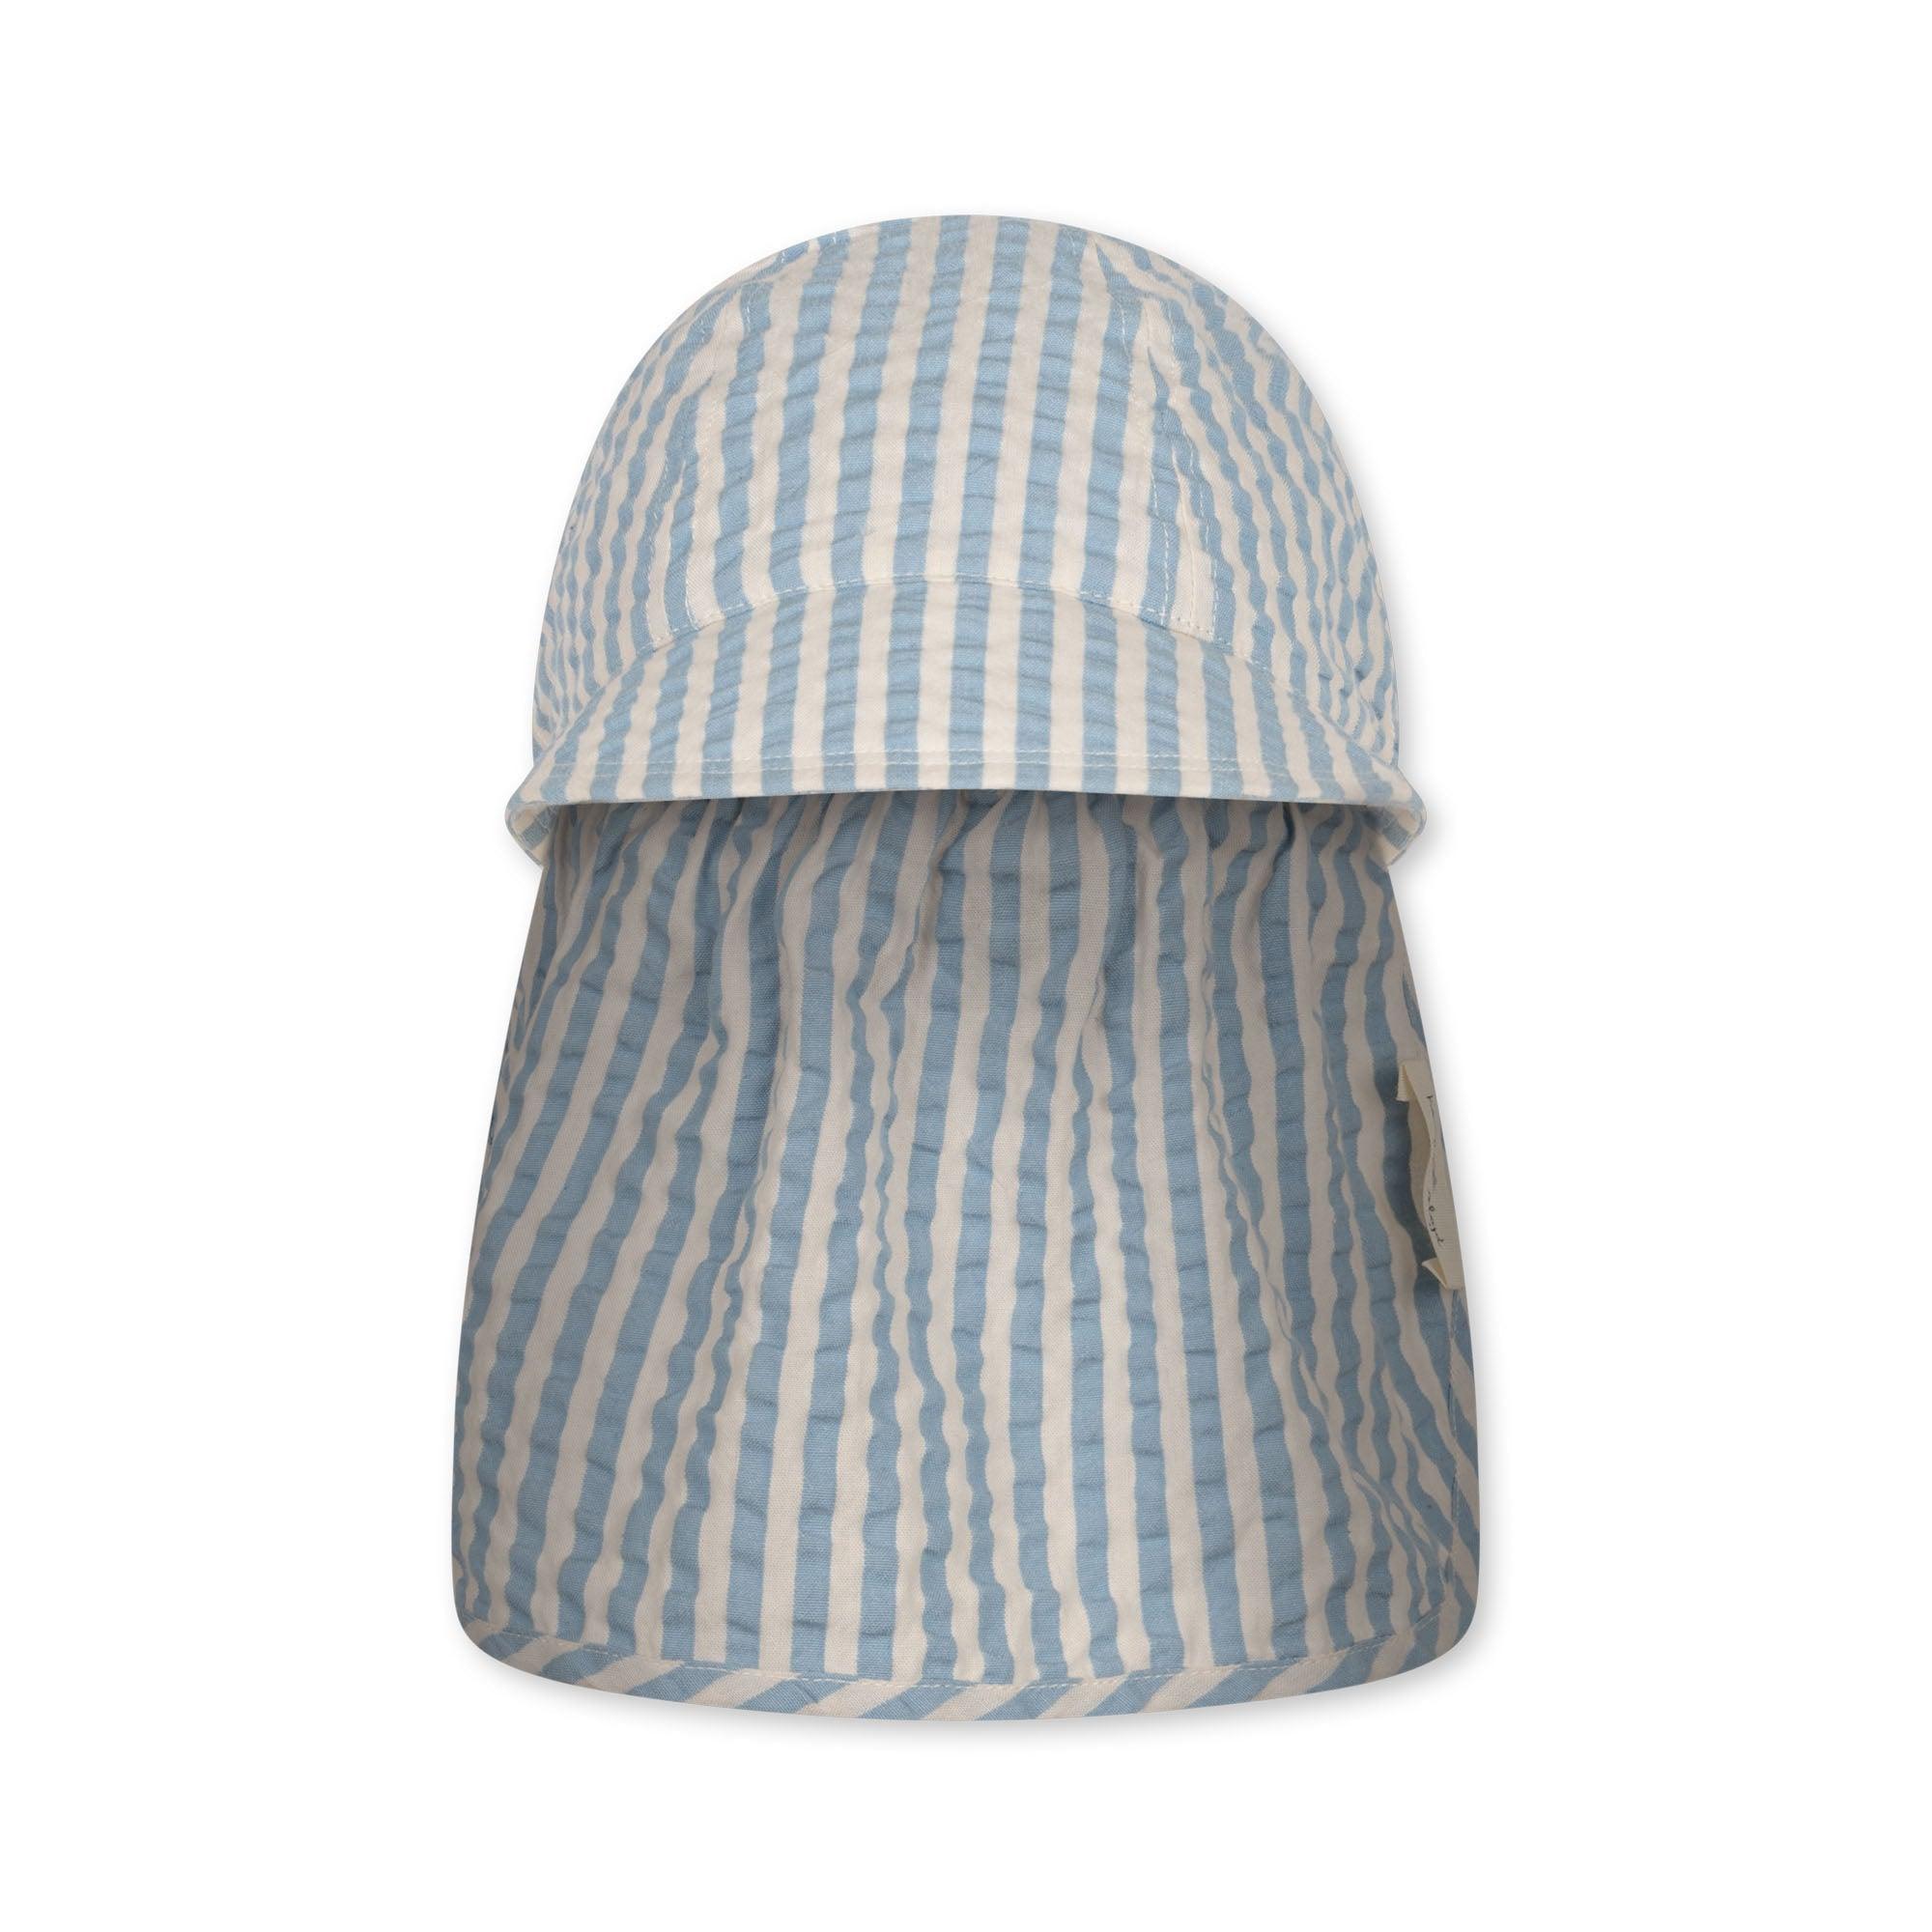 ace brim sunhat, glacier stripe - Why and Whale